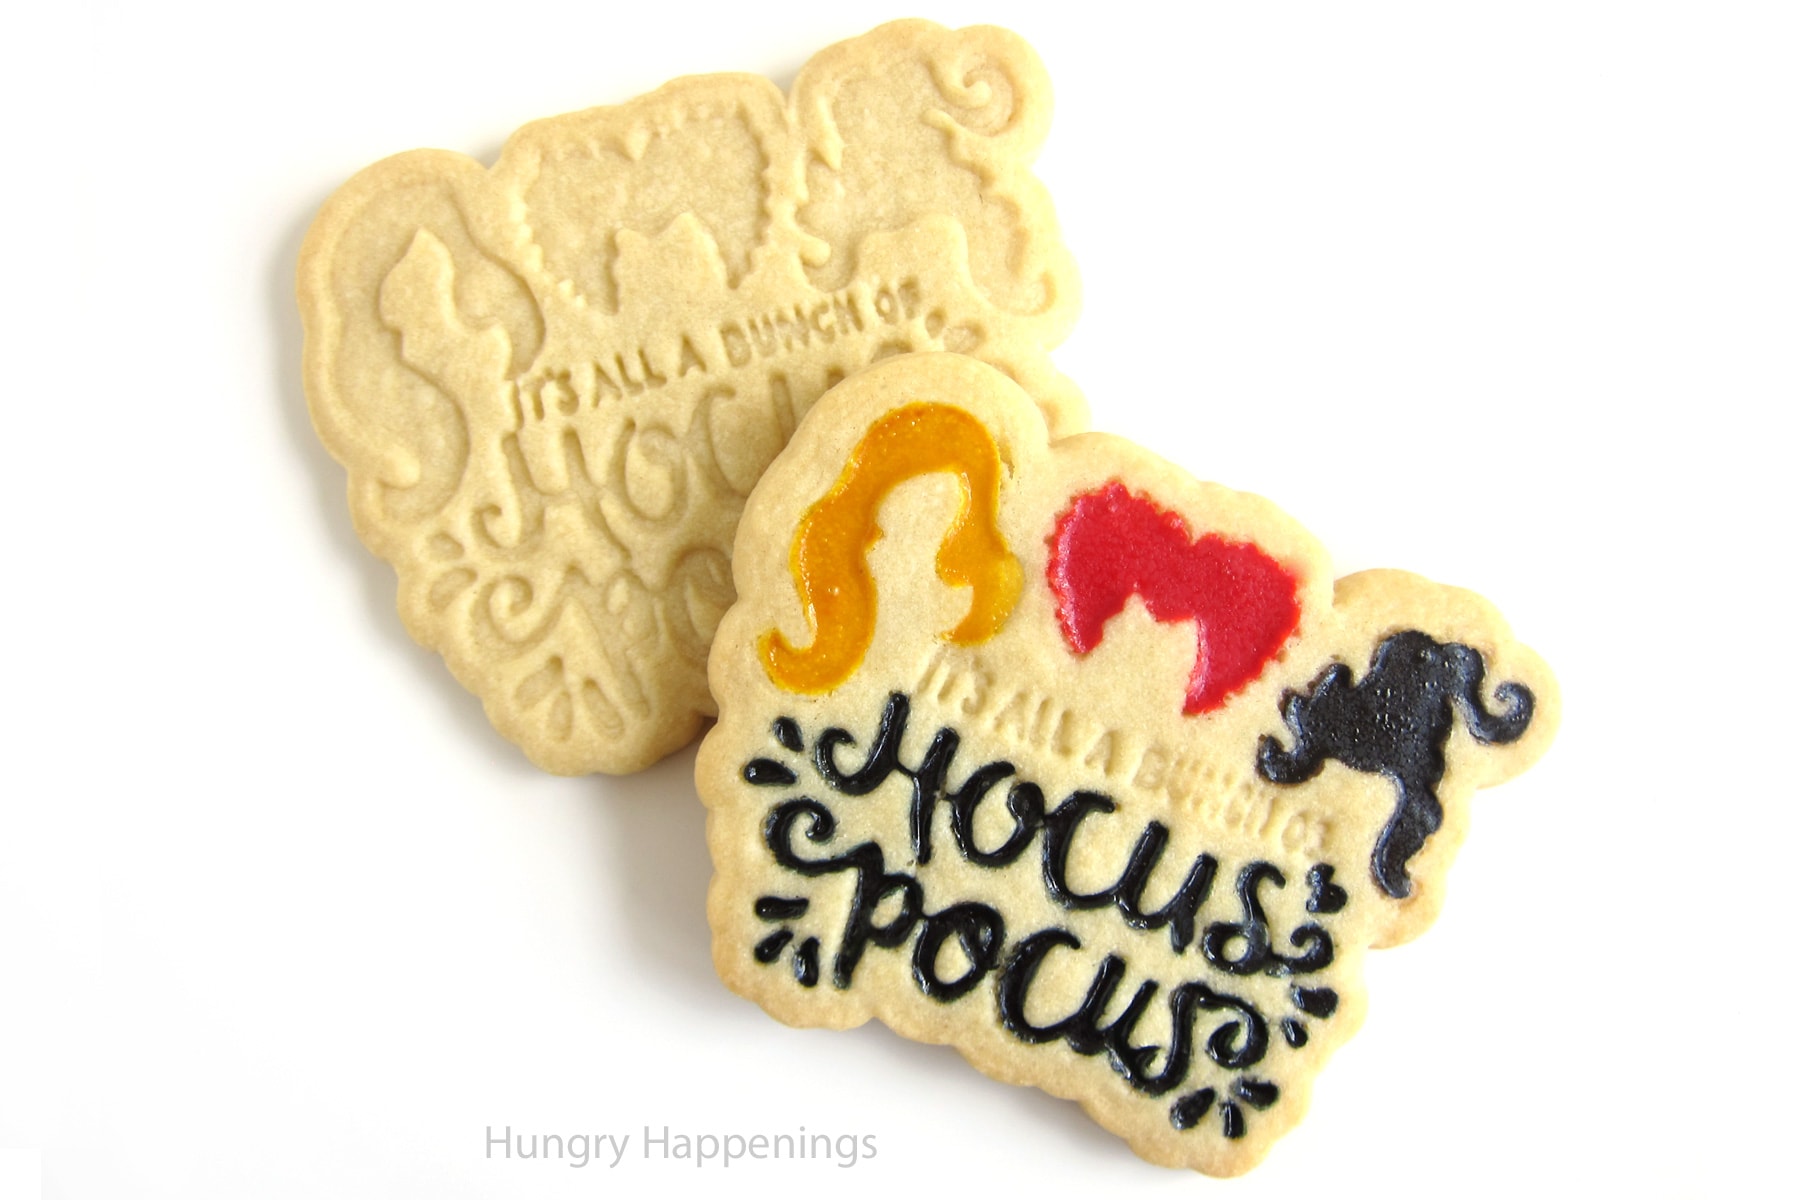 hand-painted Halloween cookies with "it's all a bunch of Hocus Pocus" design